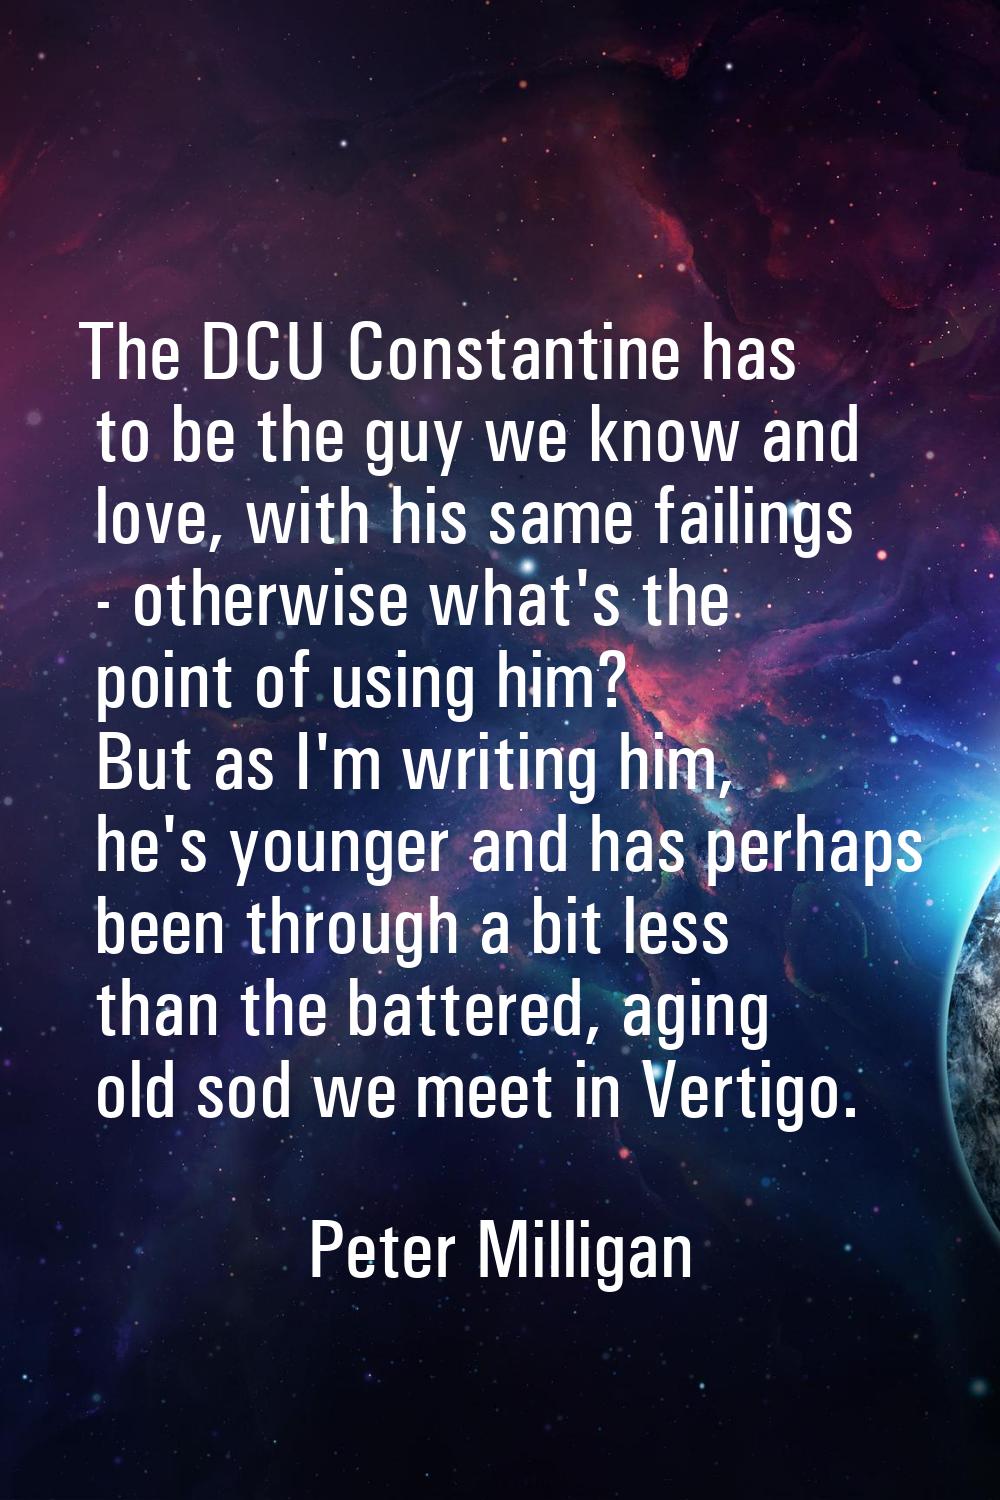 The DCU Constantine has to be the guy we know and love, with his same failings - otherwise what's t